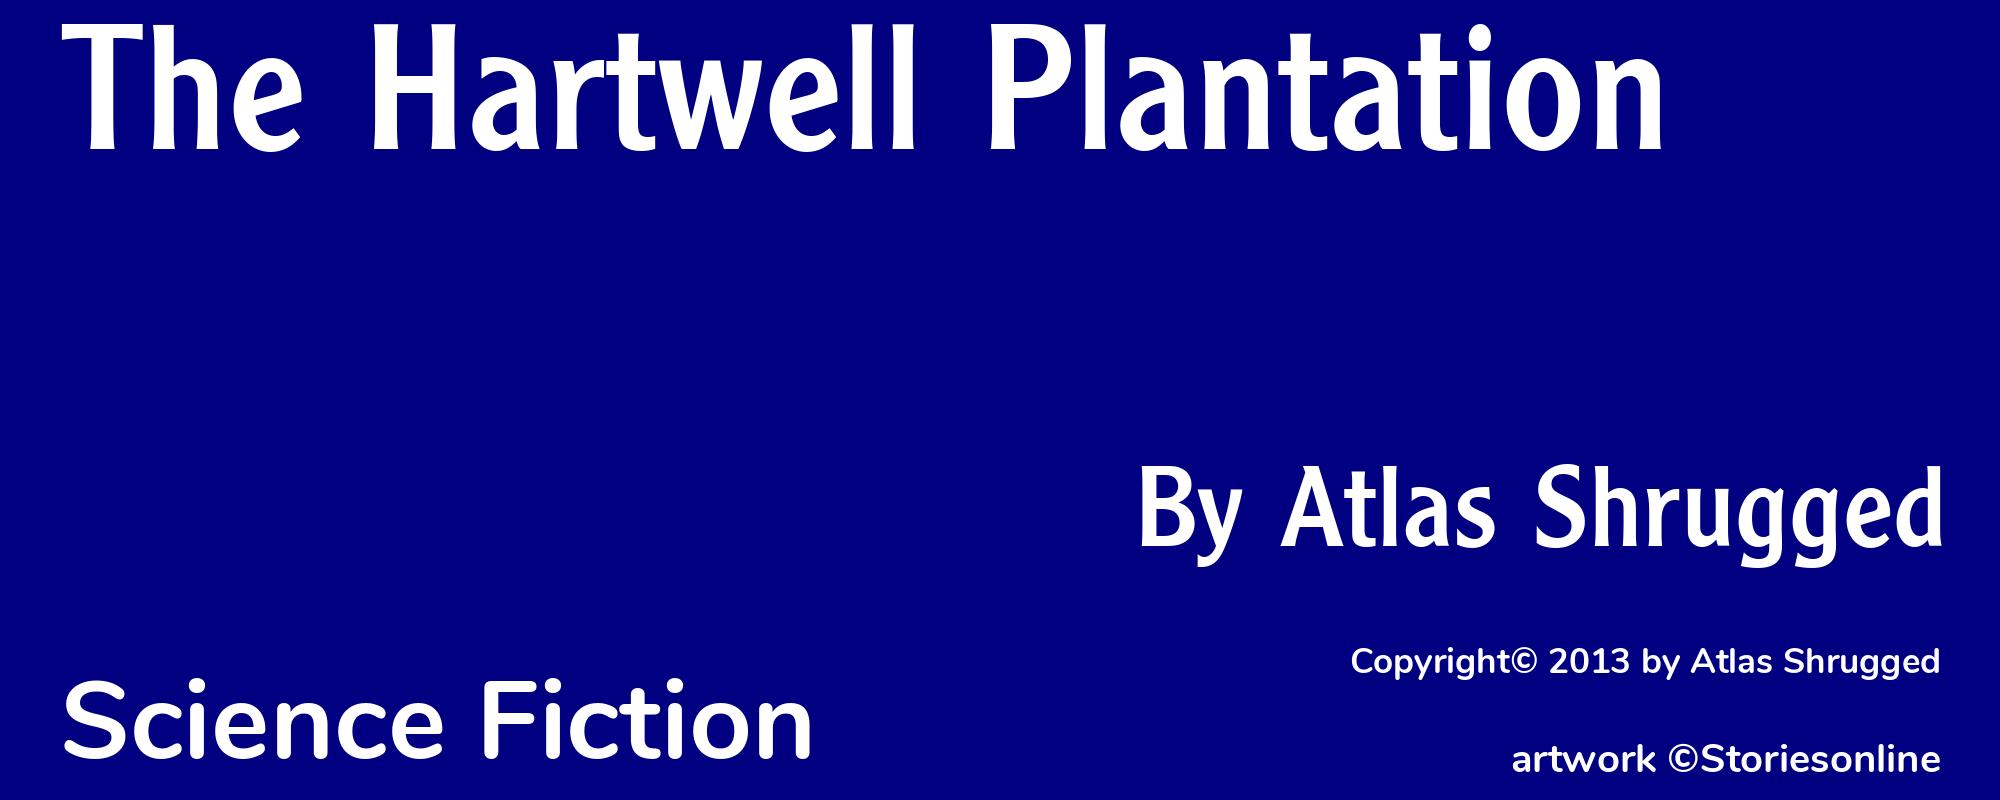 The Hartwell Plantation - Cover